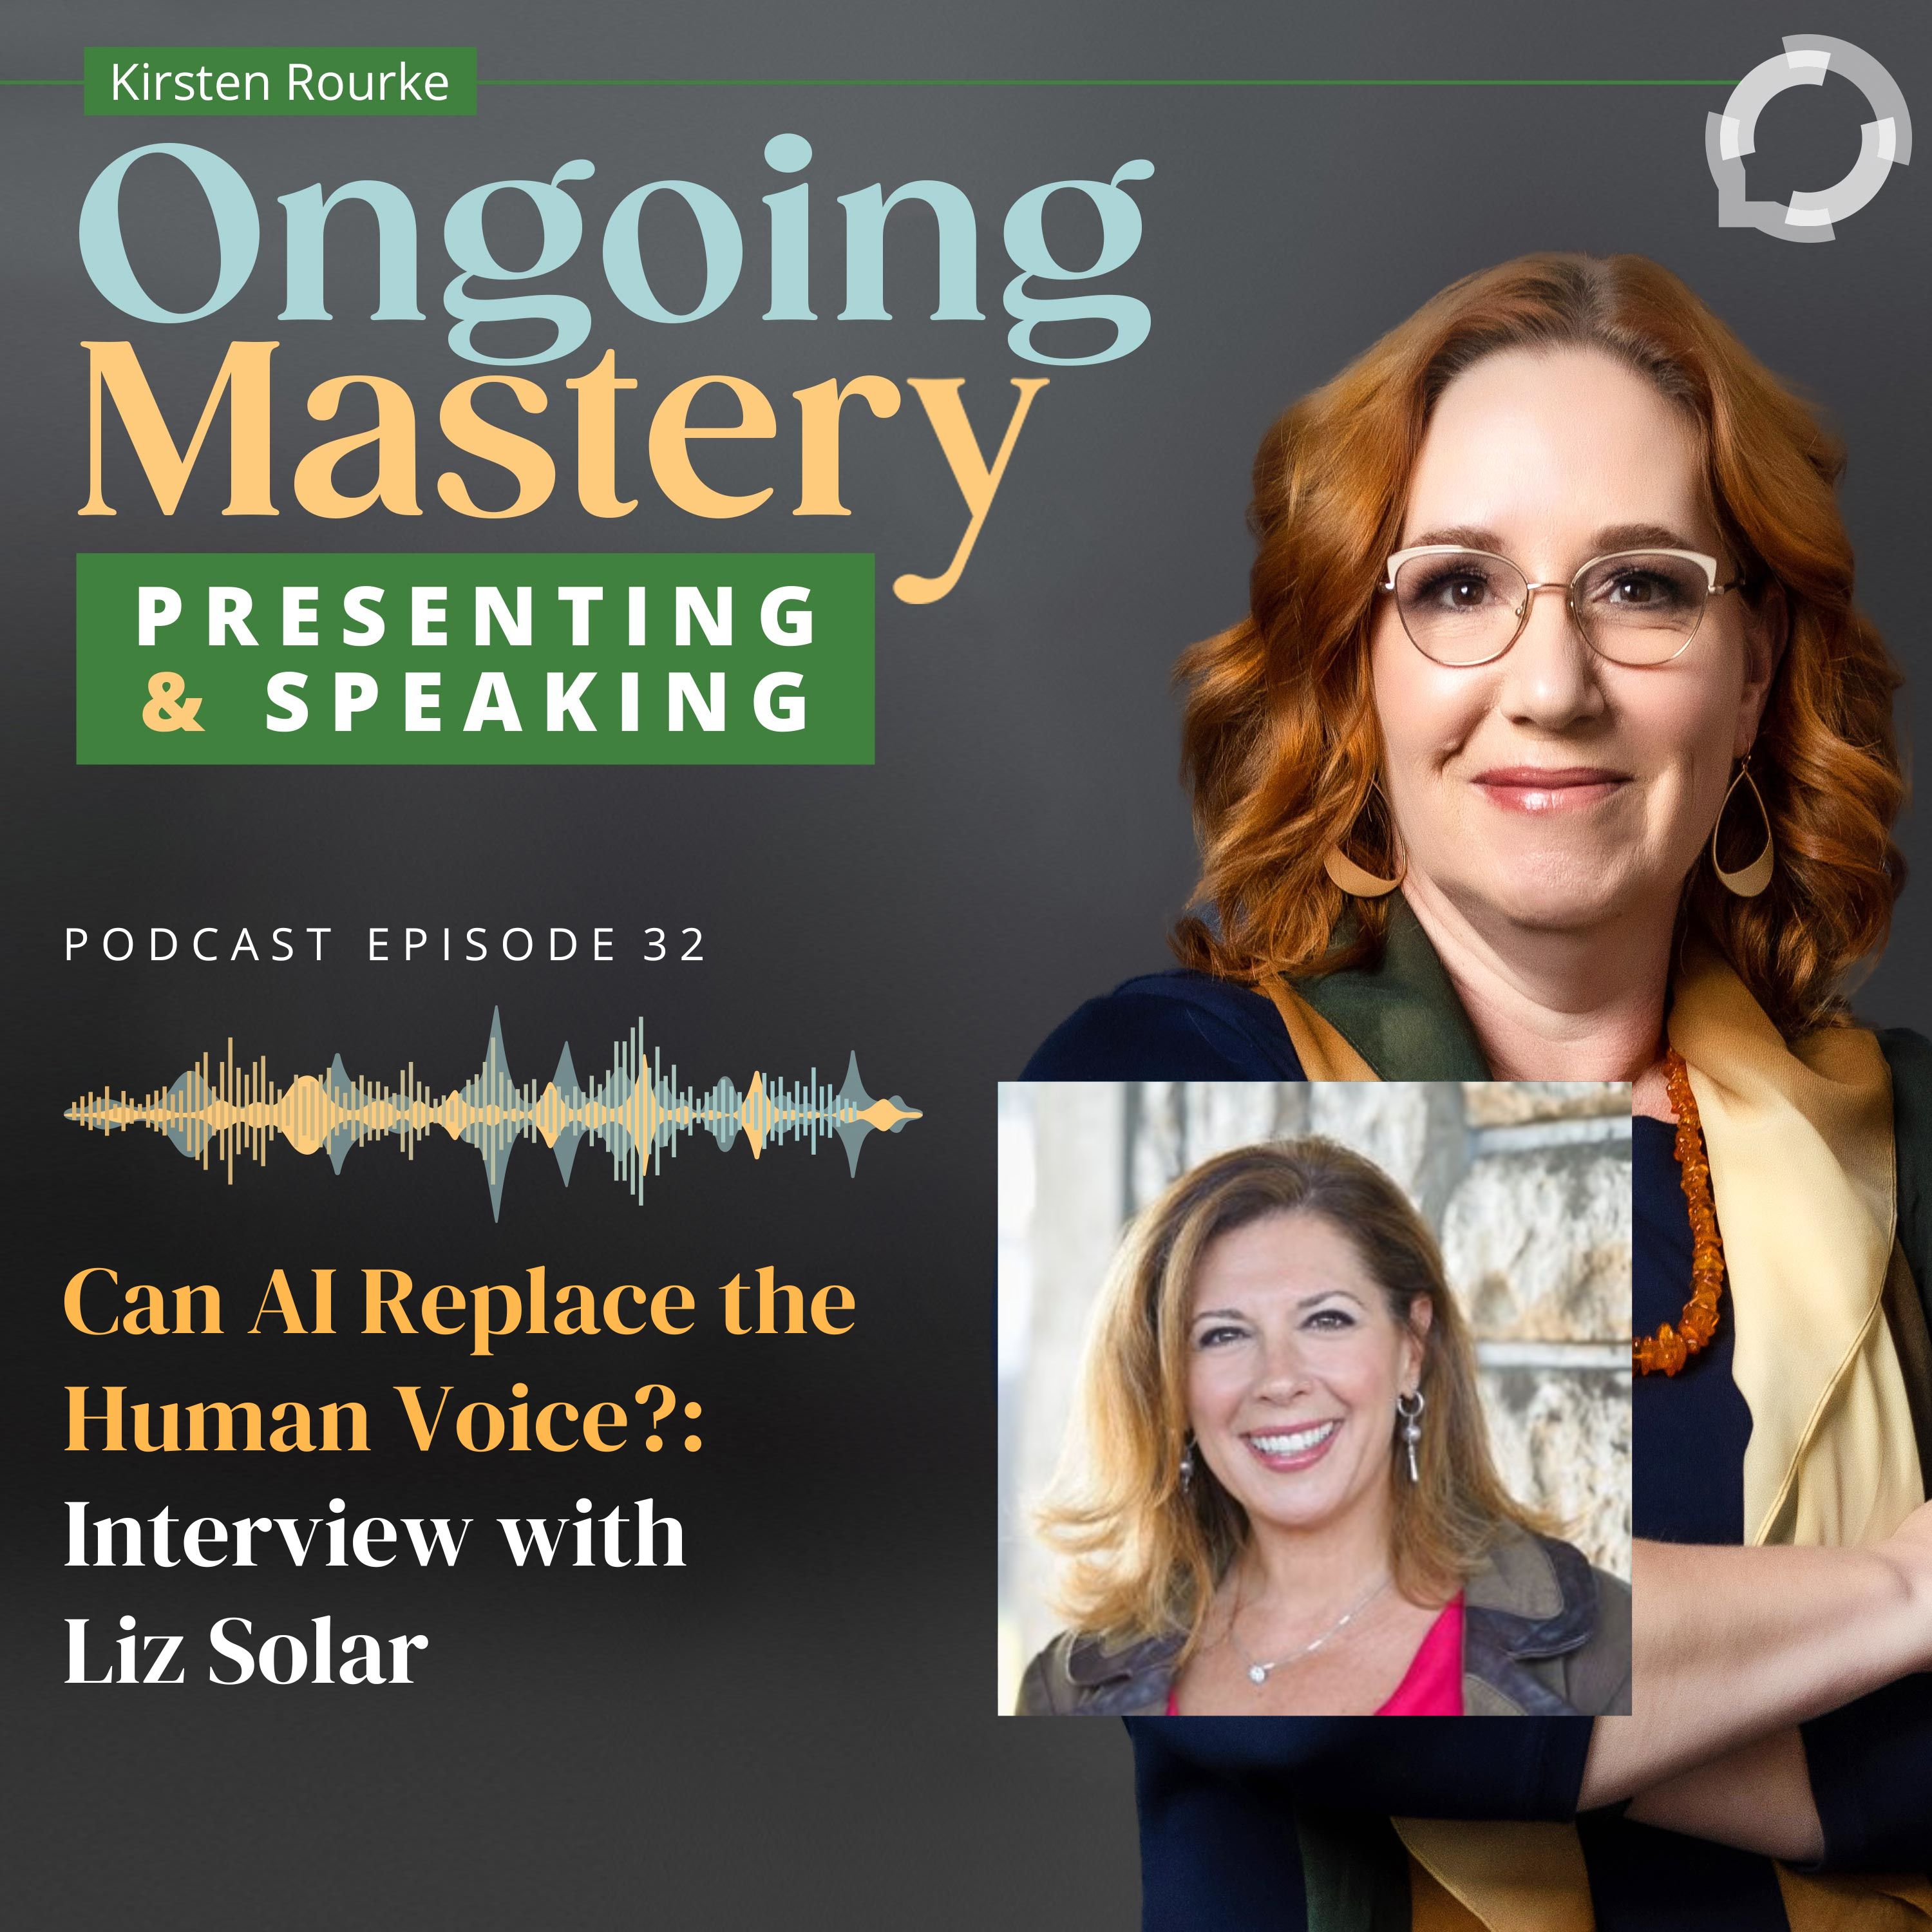 Artwork for podcast Ongoing Mastery: Presenting & Speaking